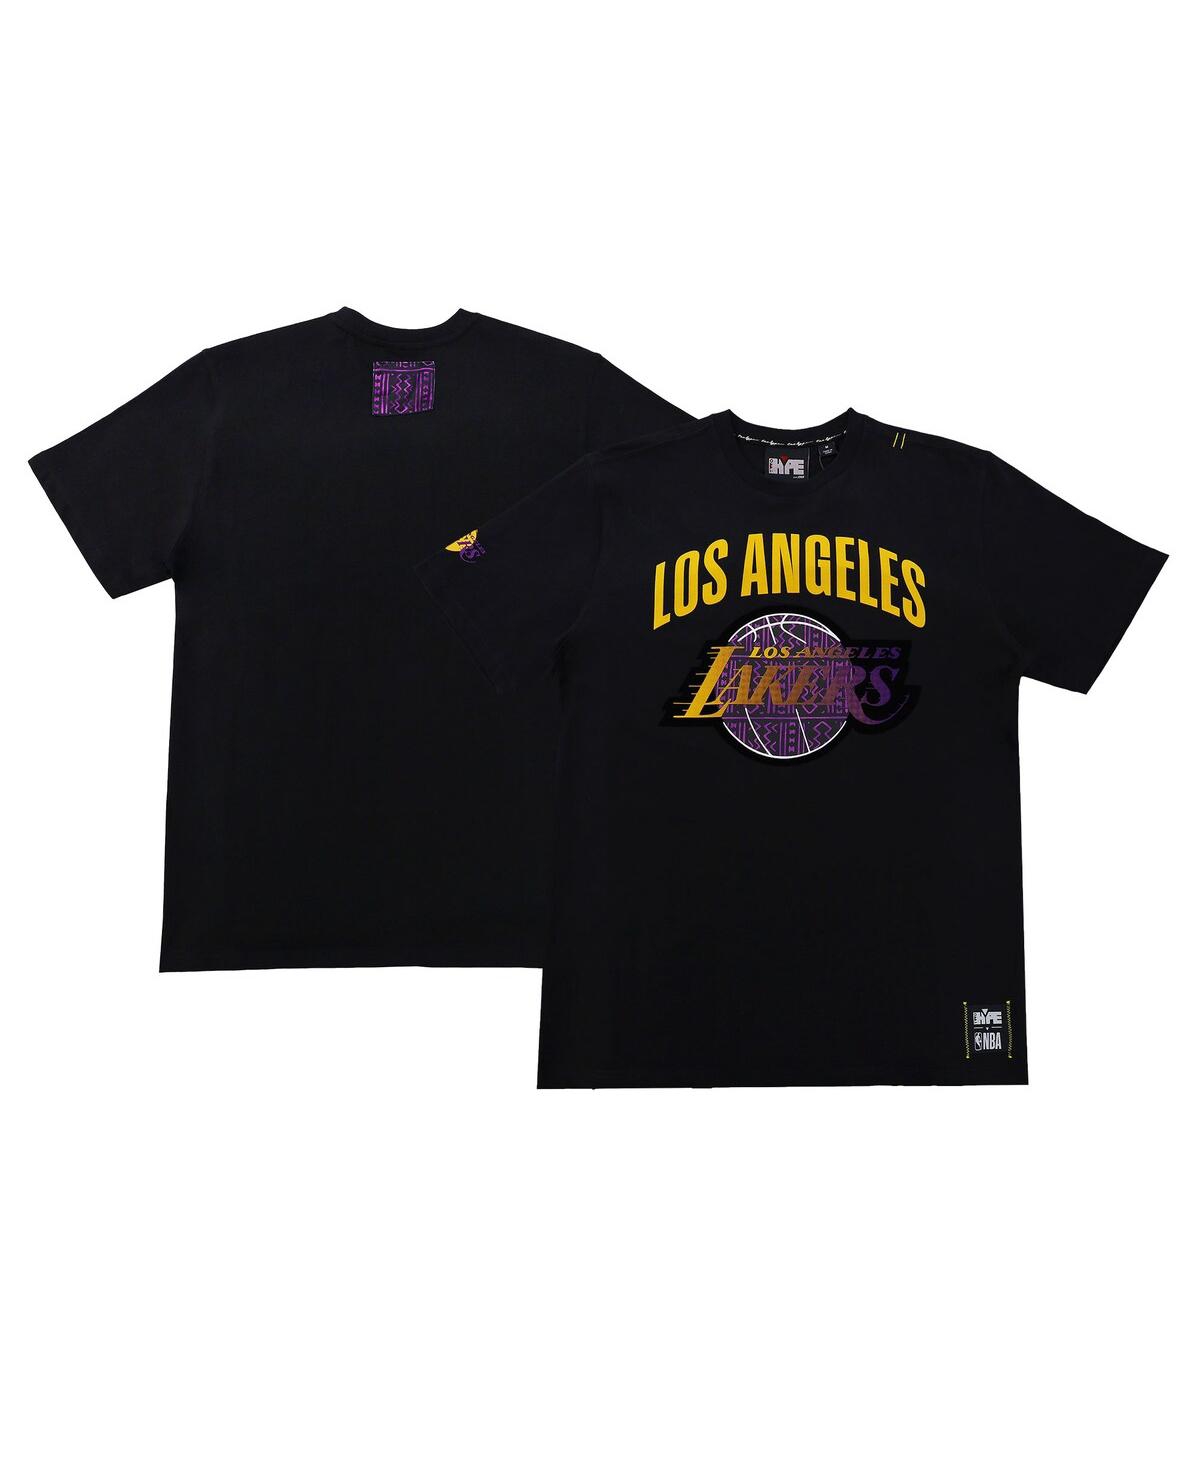 Men's and Women's Nba x Two Hype Black Los Angeles Lakers Culture & Hoops T-shirt - Black